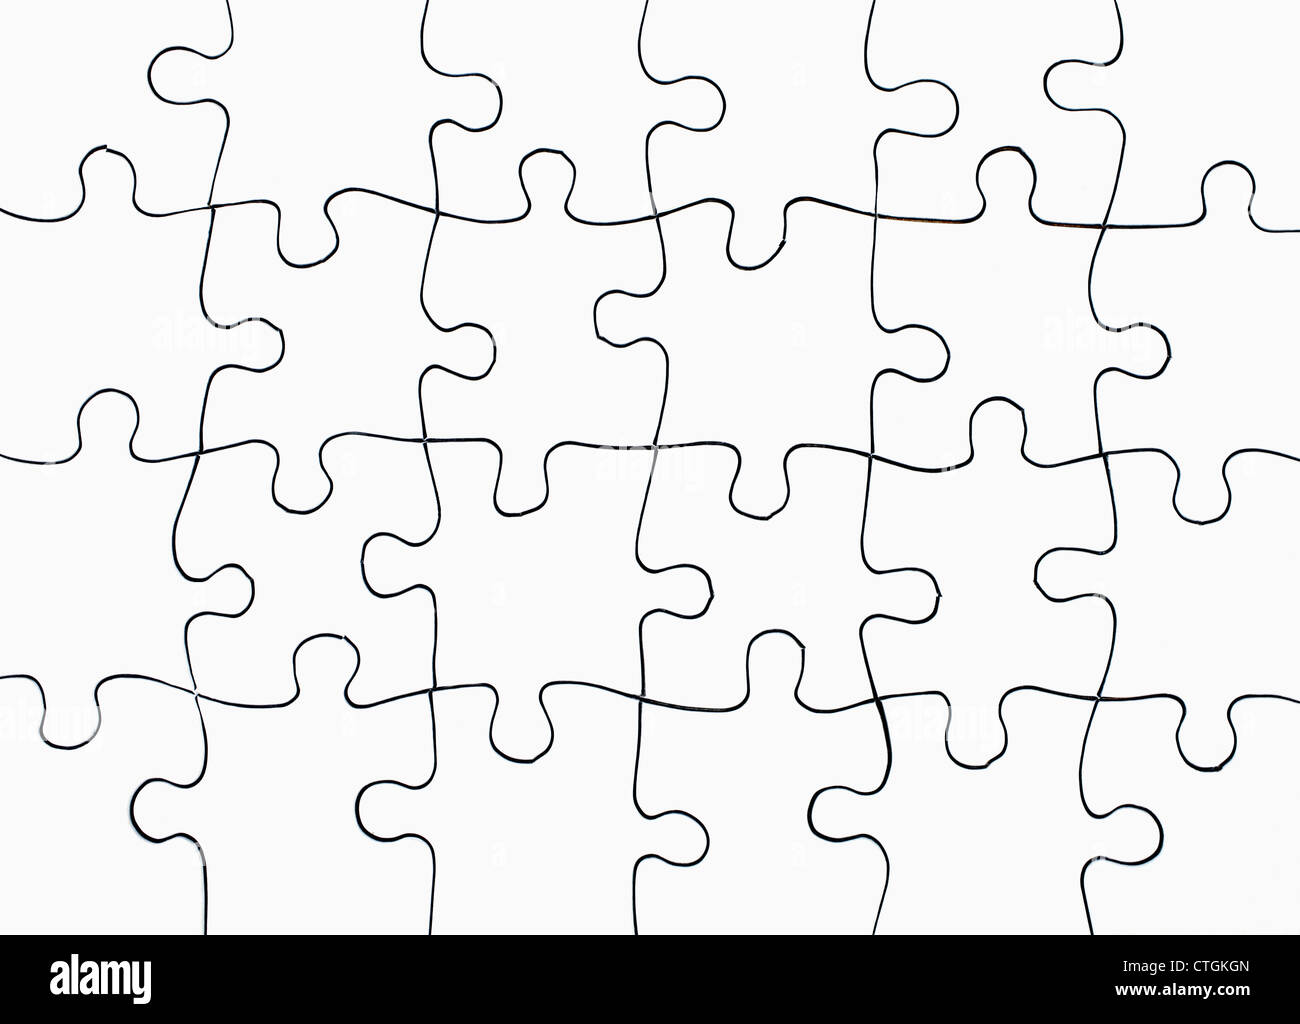 Puzzle pieces Black and White Stock Photos & Images - Alamy